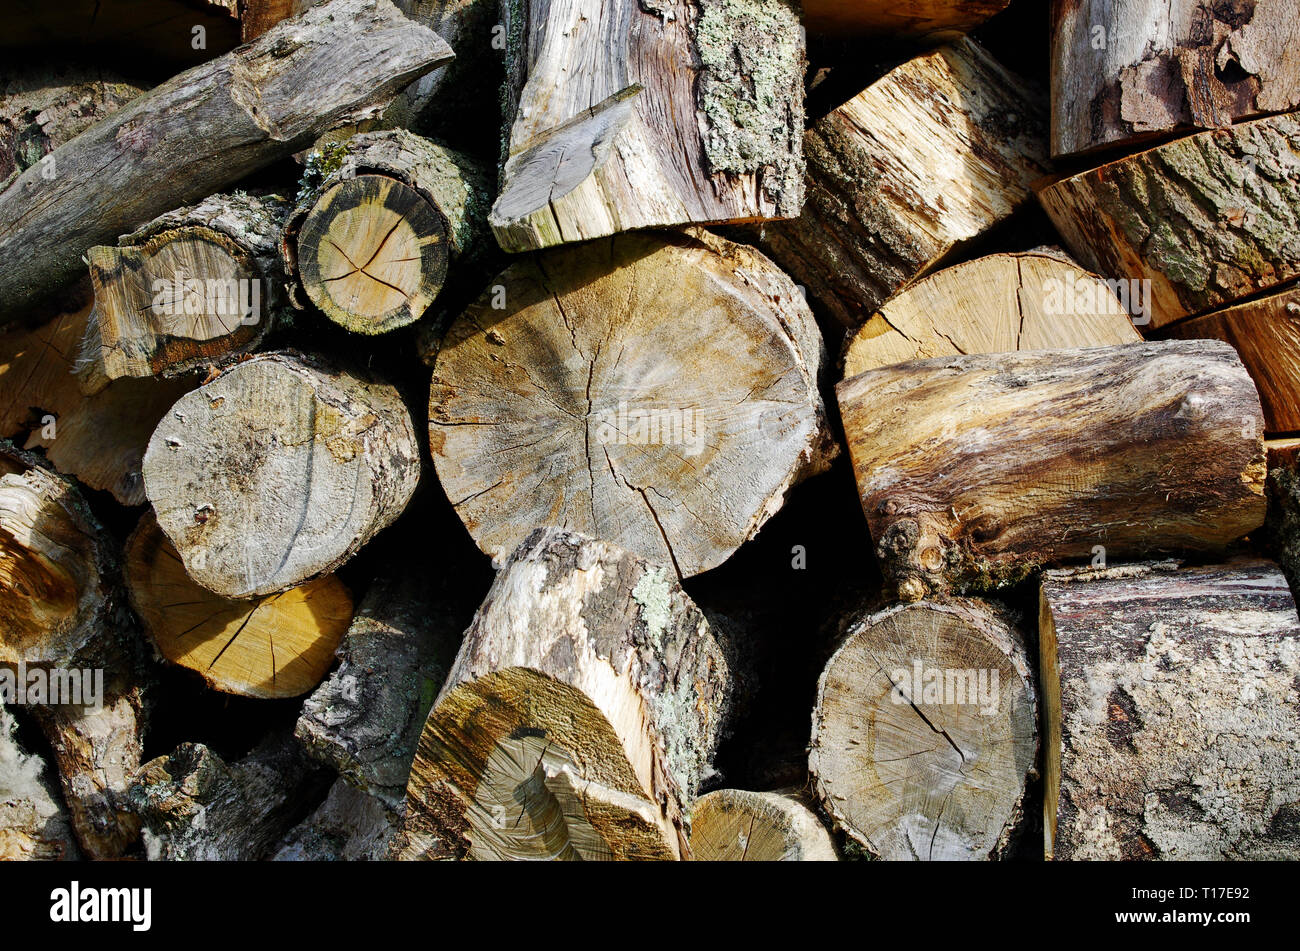 Close-up of old rough-hewn textured chopped logs stacked for firewood, England, UK Stock Photo